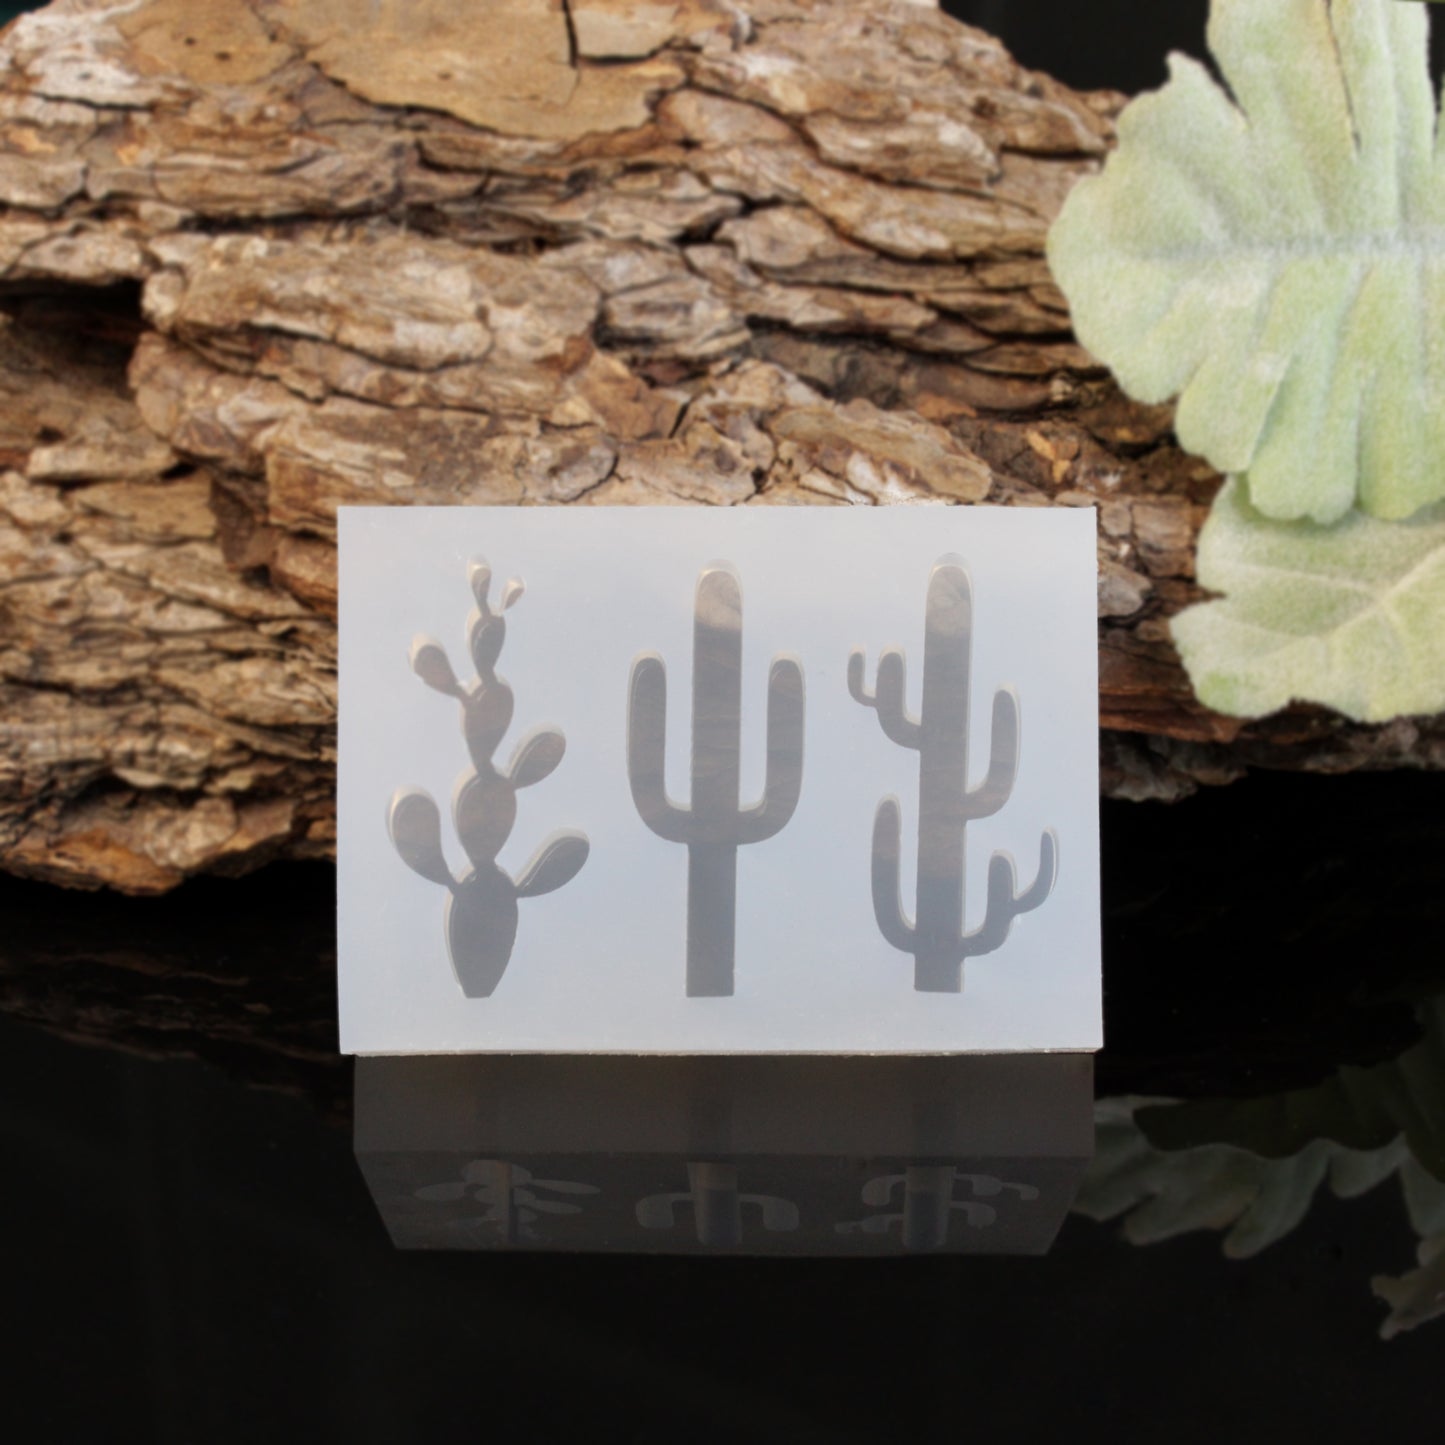 Cactus Silicone Resin Mold - 3 in 1